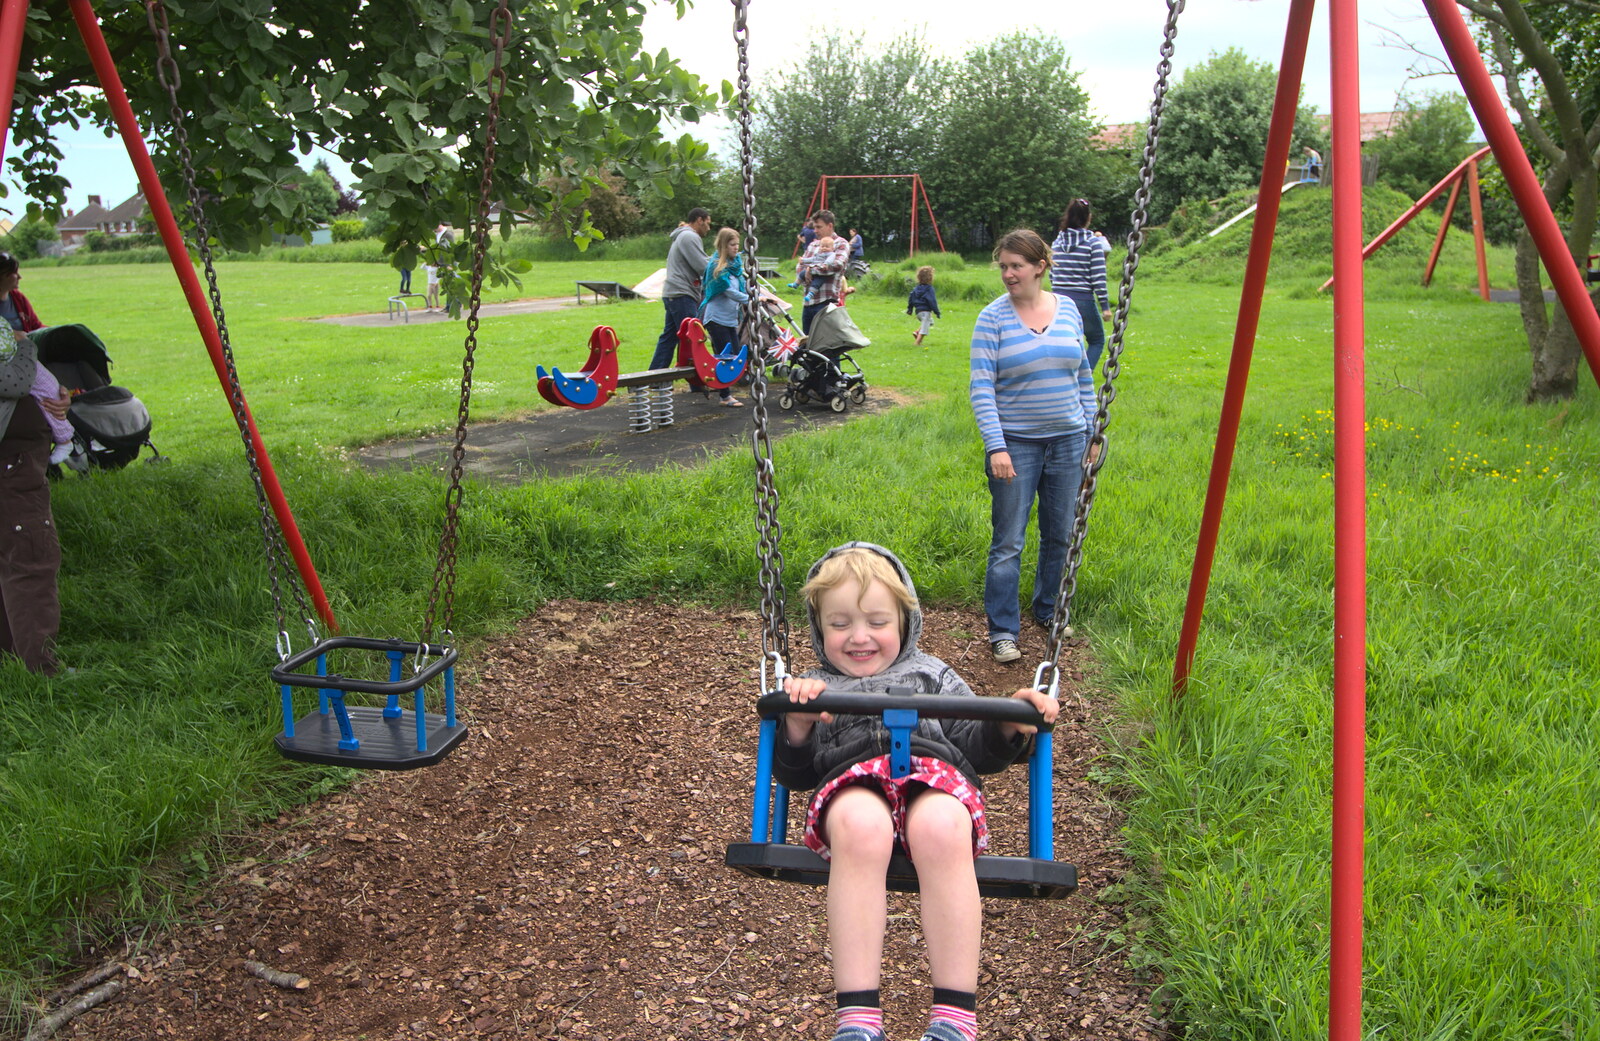 Fred's Sports Day and Other Stories, Palgrave, Suffolk - 2nd June 2012: Isobel does swing pushing